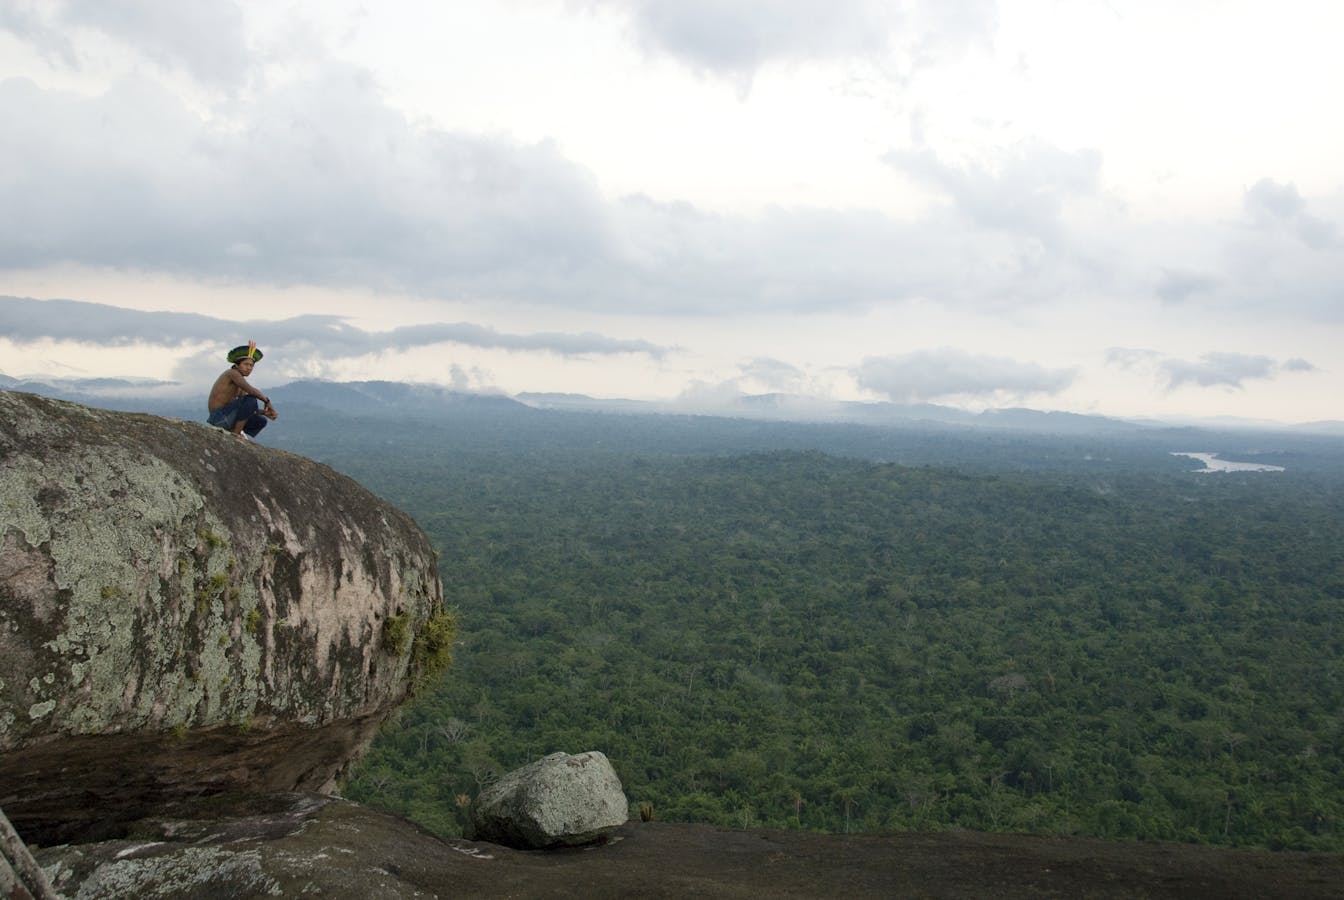 Kayapo man on top of the mountains with forest.